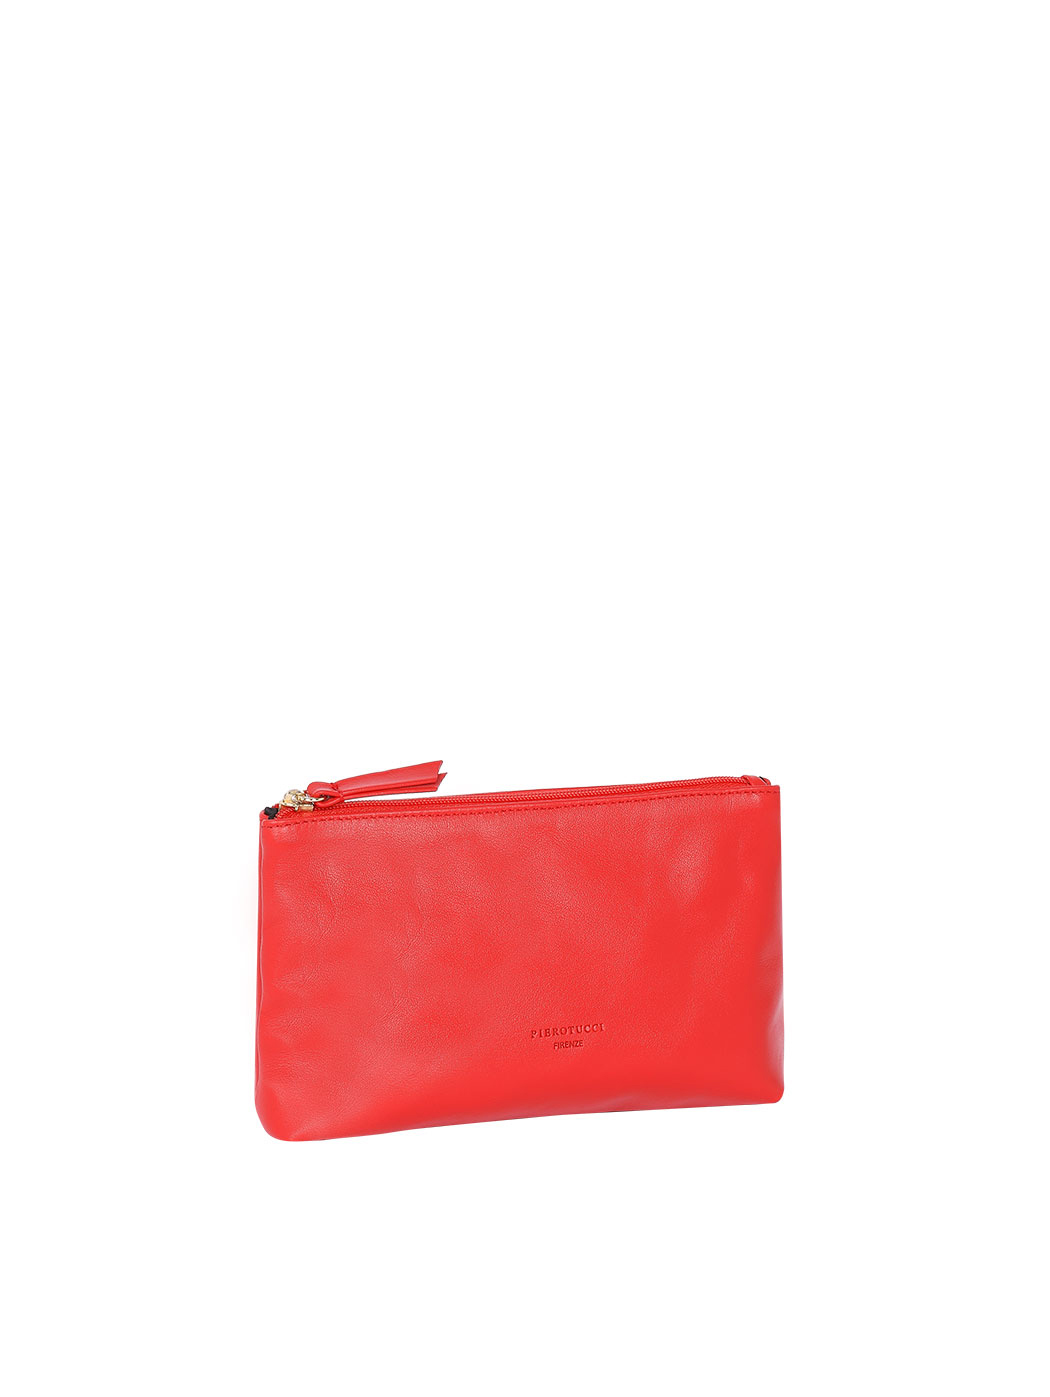 Red Clutch Purse with Brushed Metal Effect & Short Strap